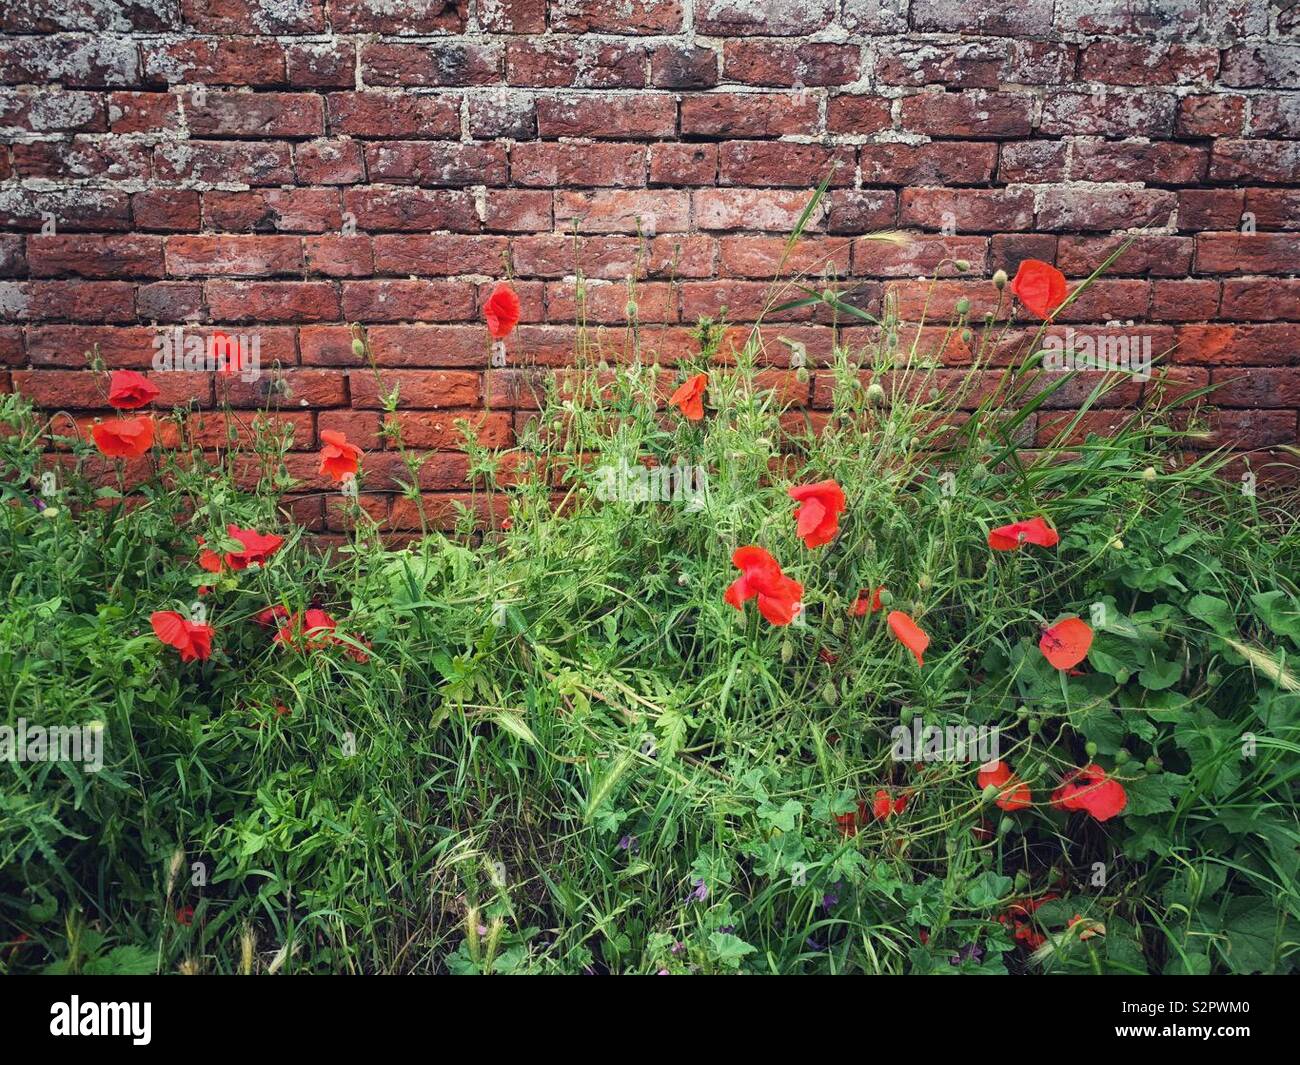 Poppies growing wild against a red brick wall Stock Photo